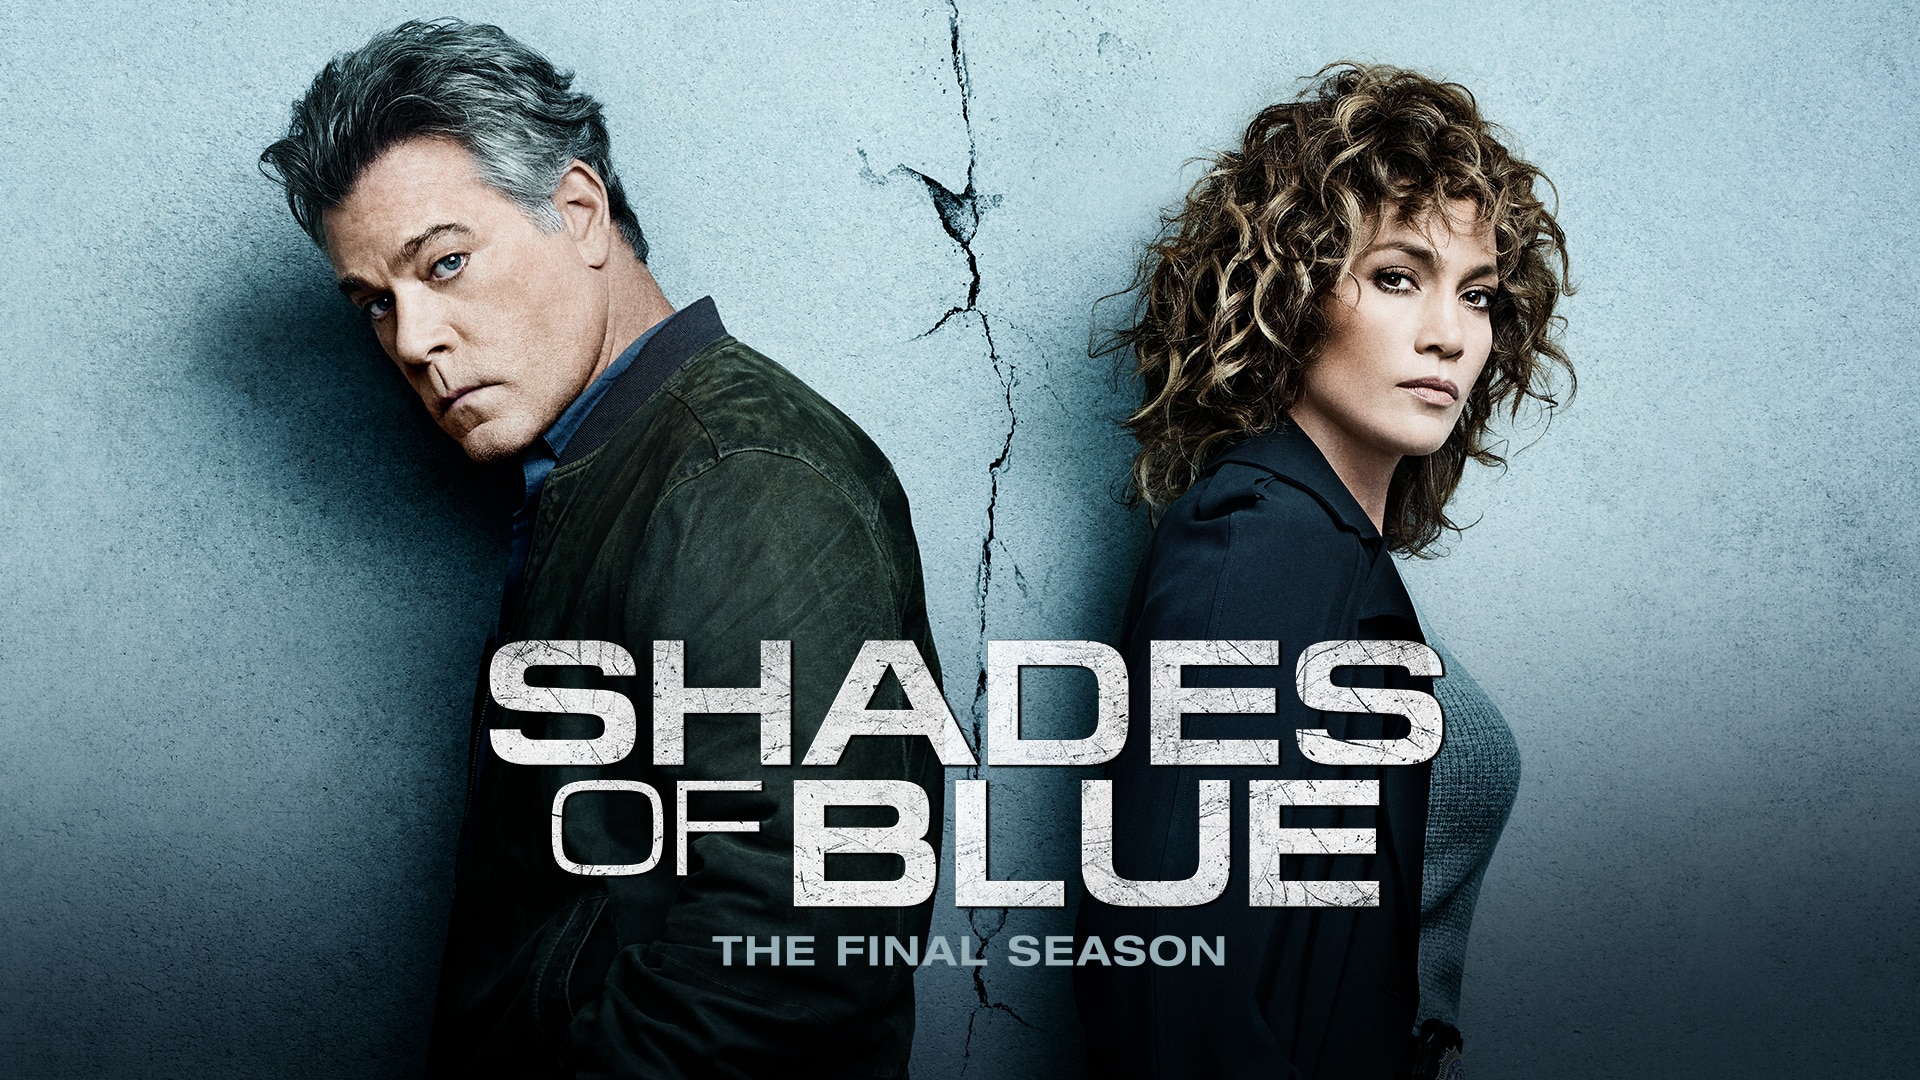 Shades of Blue (TV series) - Wikipedia